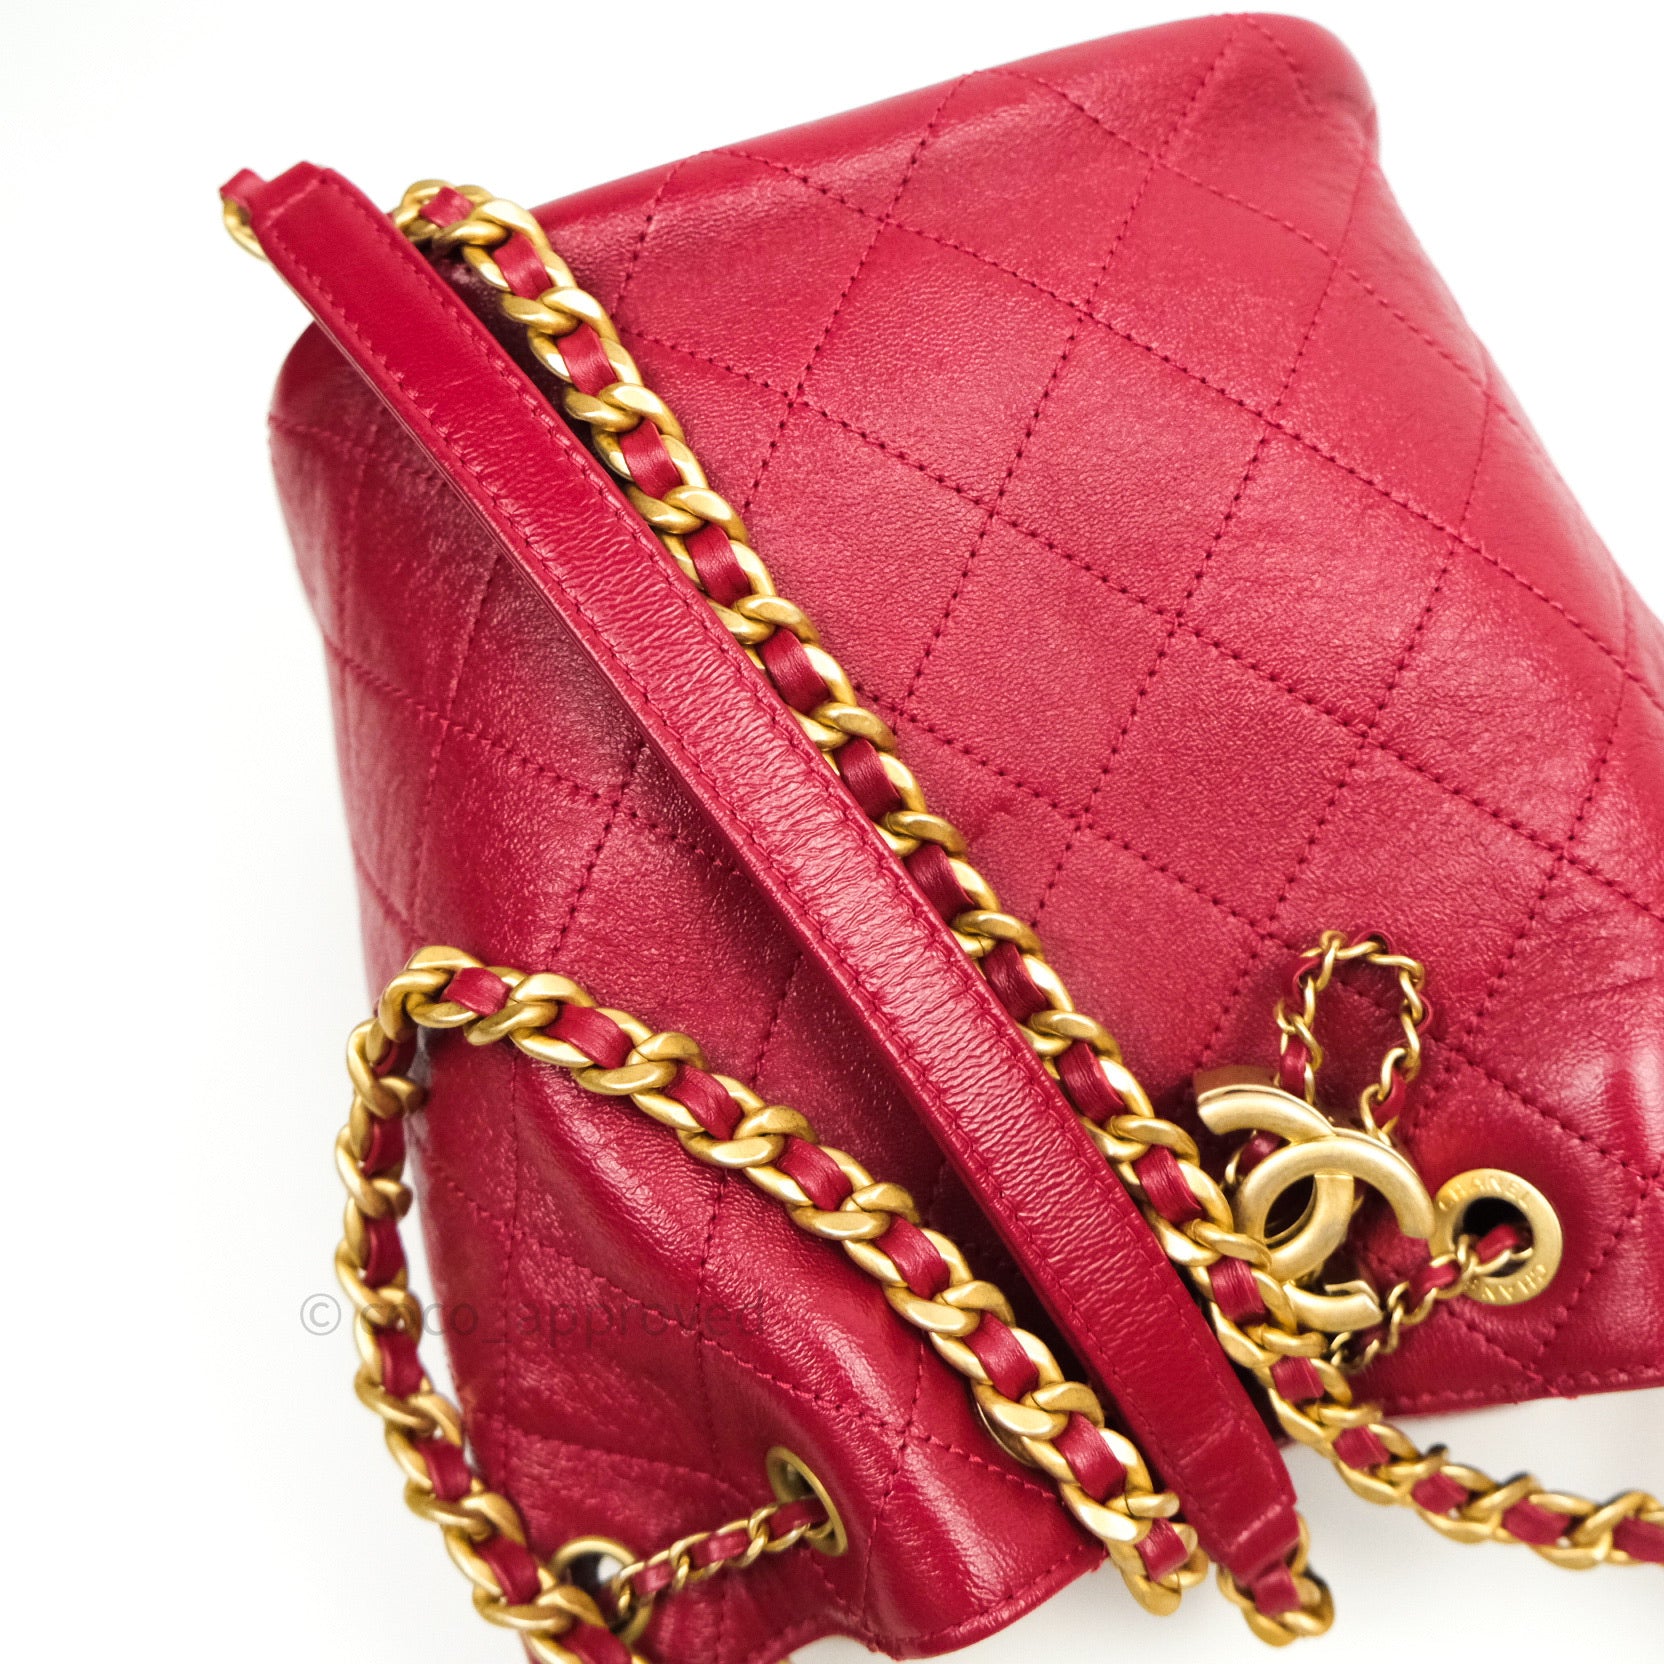 Chanel Quilted Leather Drawstring Bag, 1986-89